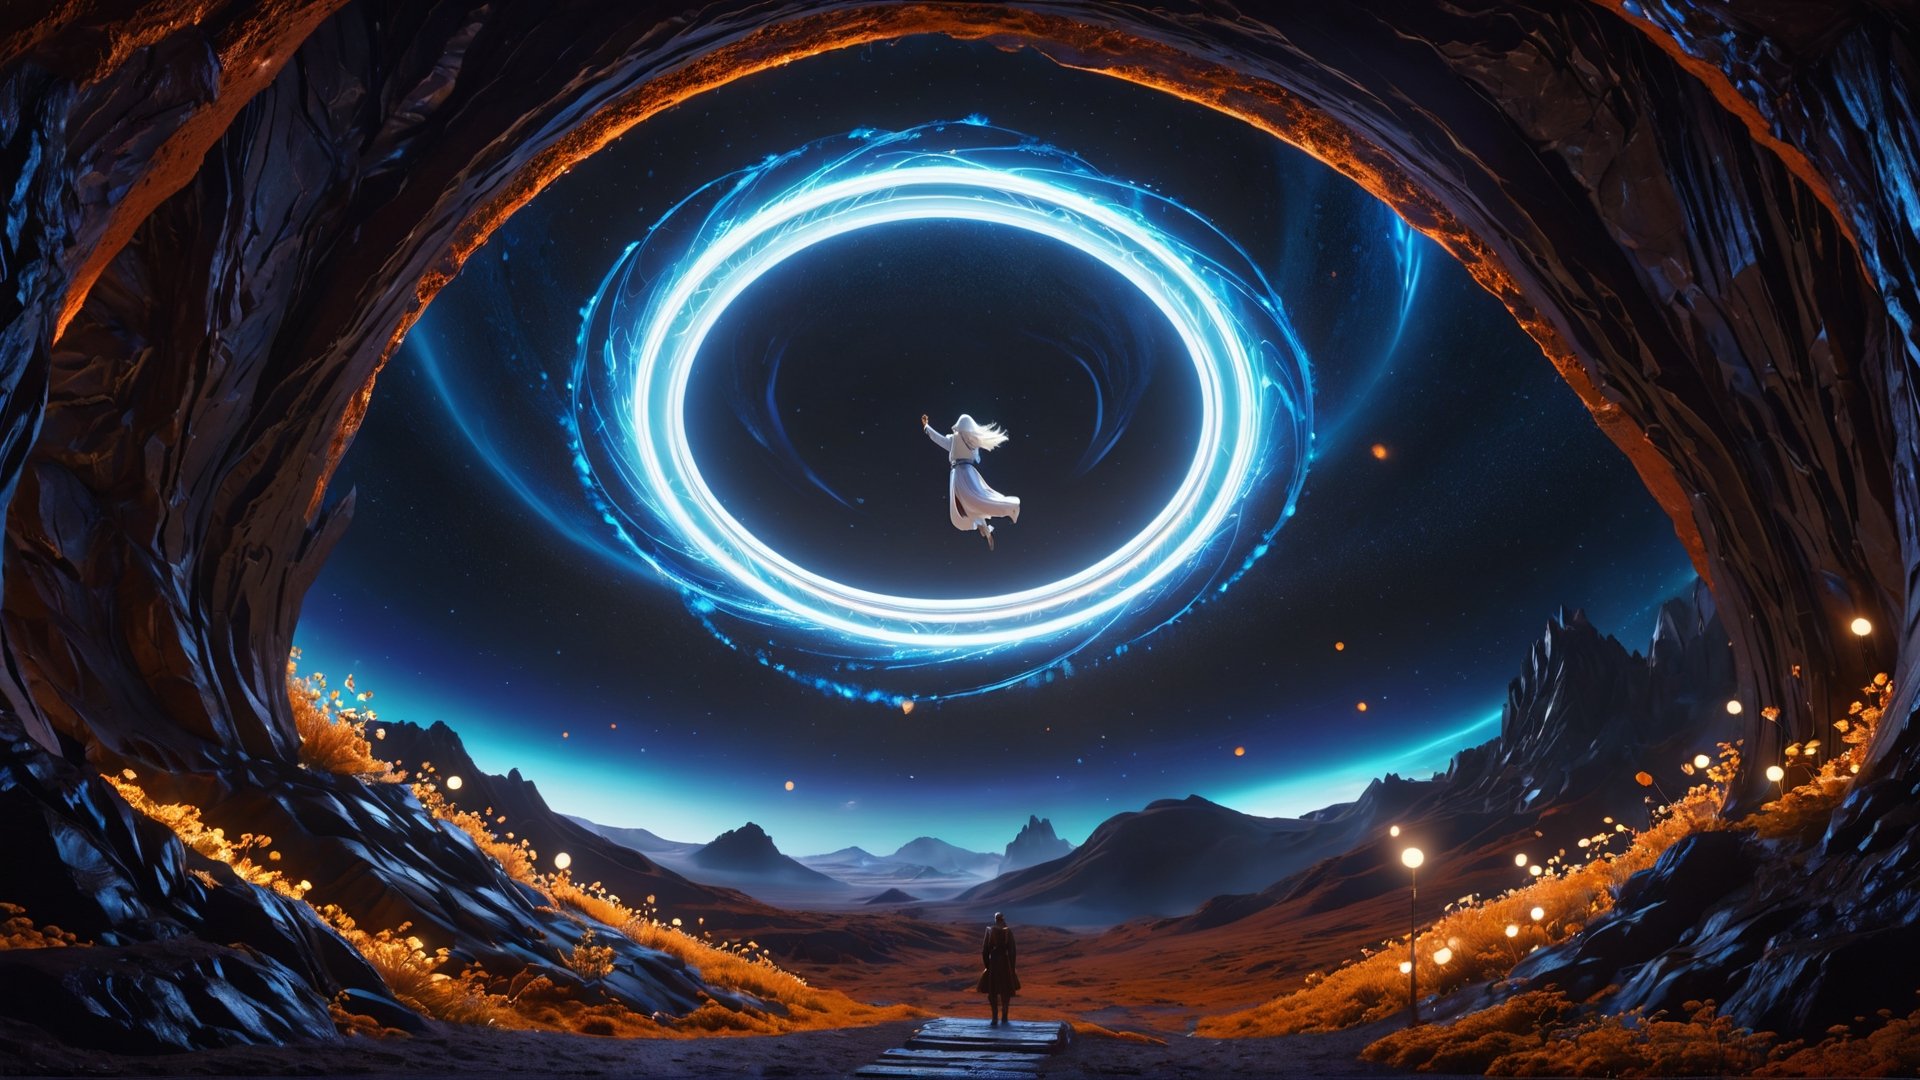 (Cinematic of a zen man Nordic kind, white long hair, he_levitating:2, he flying, calm. Wearing Blue Outfit Dune style, serene, center), inside a deep orange Cave, perfect knuckles, holding a hovering Cristal sharpen, cultivating immortals, magical, abstract, dark, (swirling_lights:1.7), bloom, floating objects, iron deer, light on top heaven, ((Epic scene, gate energy)), refers to a place of wild uproar or chaos, polarization, Glowing, aura, energy, floating debris. Modern art style, promptshare.art, horrible scene, Film Still, realistic, Frequency vibration, hyper details, Renaissance Sci-Fi Fantasy, ((((Close-up shot:2)))